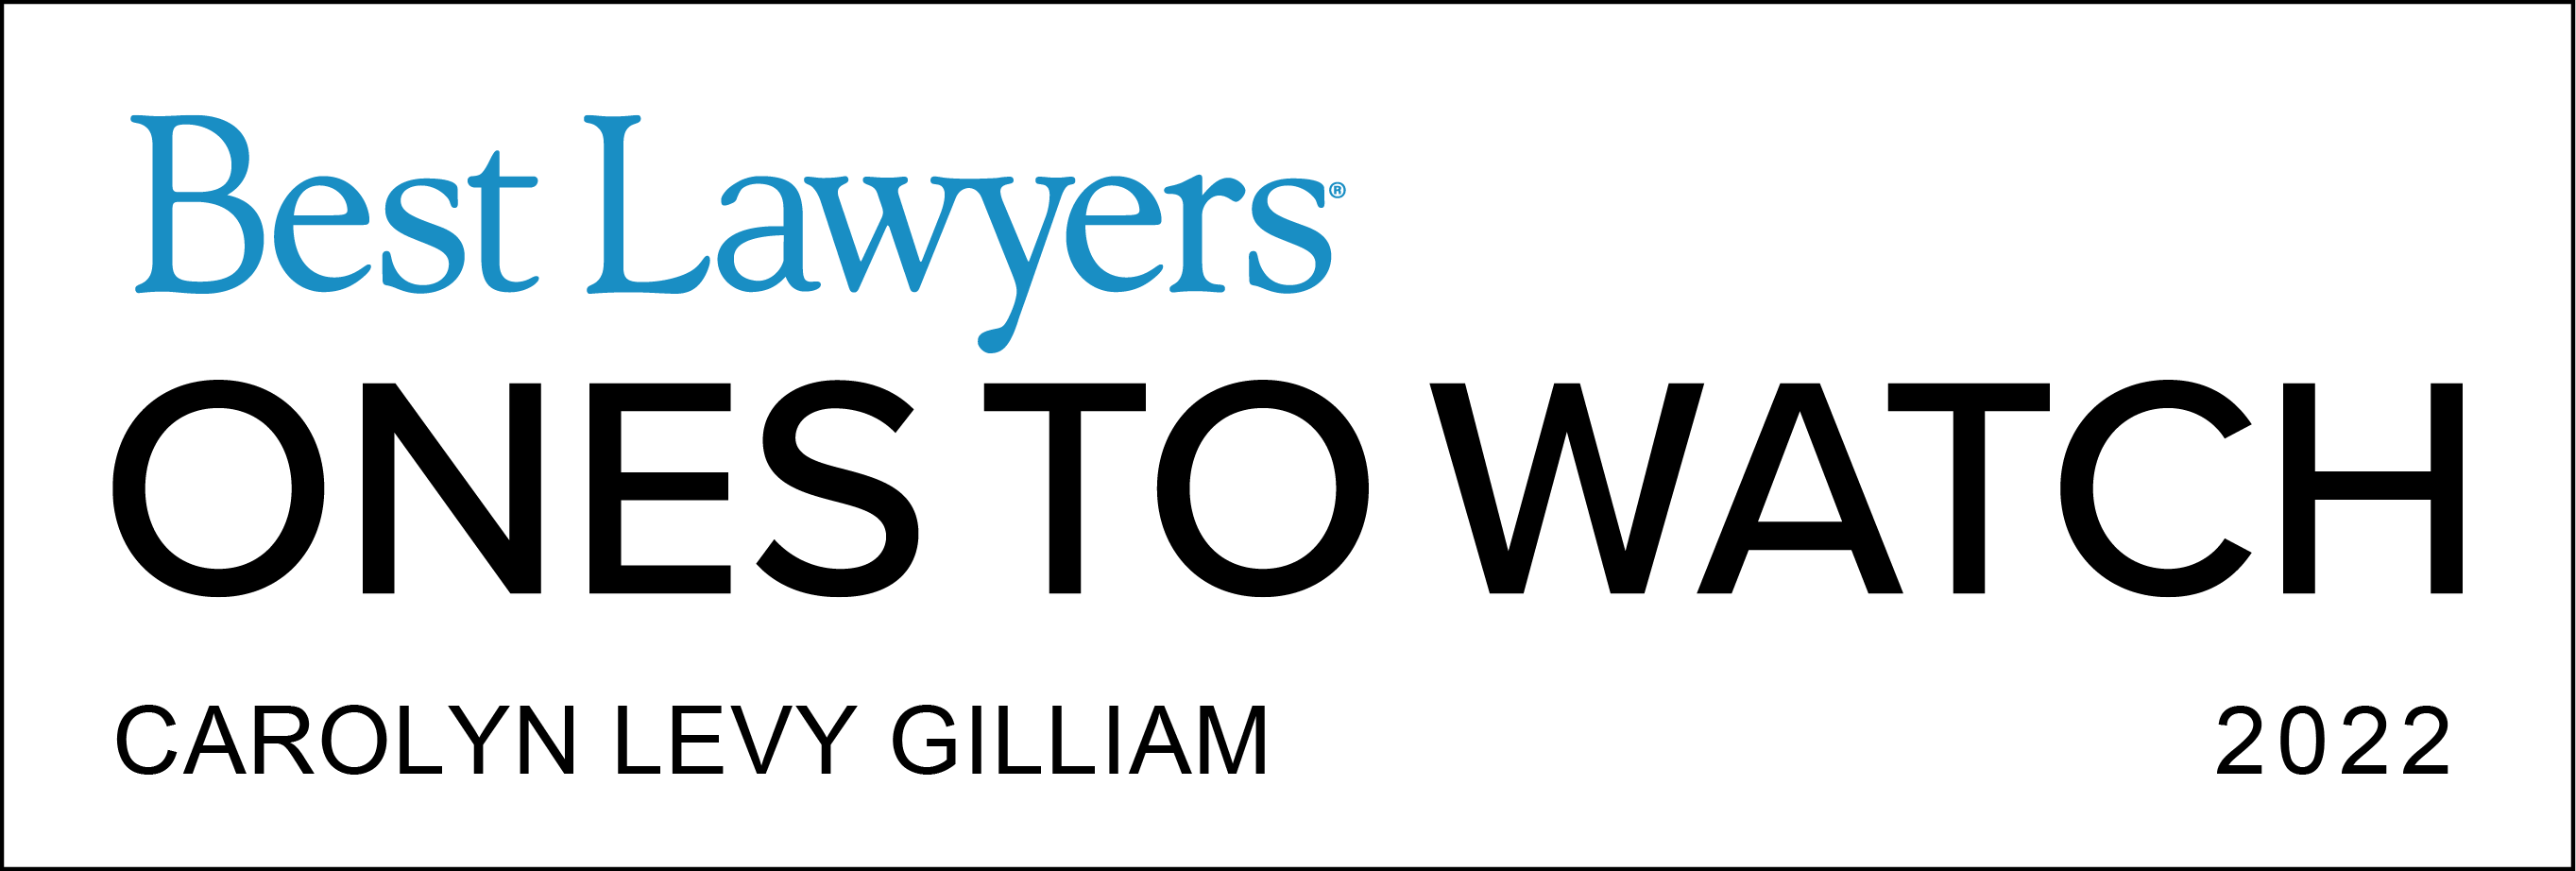 Carolyn Levy Gilliam - 2022 Best Lawyers One to Watch in Elder Law, Litigation - Trusts and Estates and Trusts and Estates